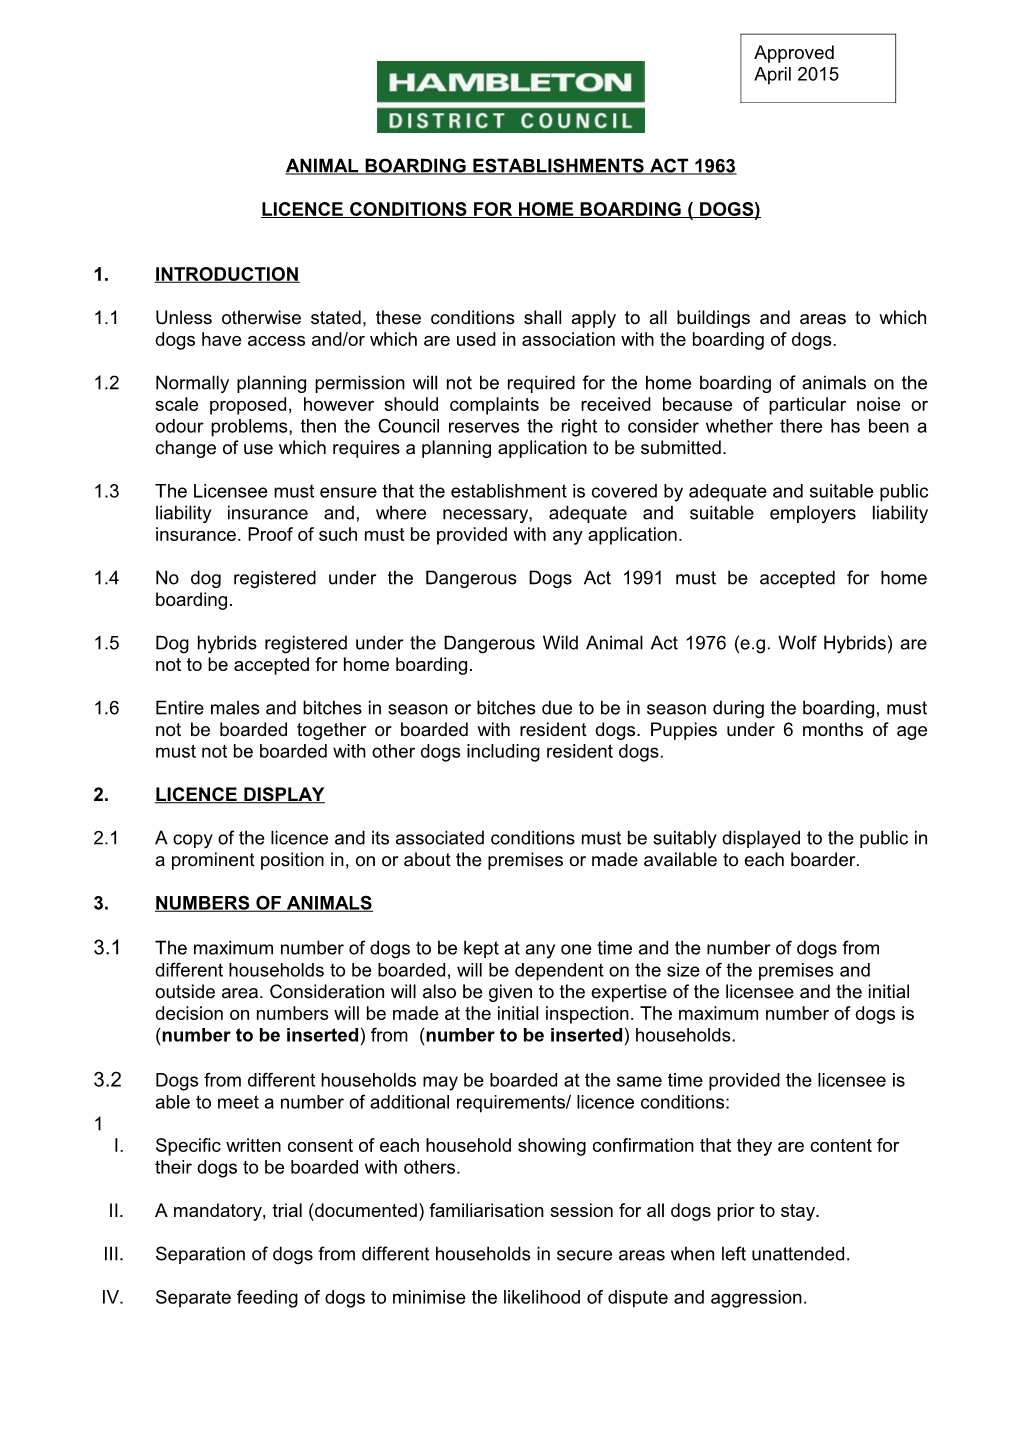 Draft Model Licence Conditions for Home Boarding ( Dogs)